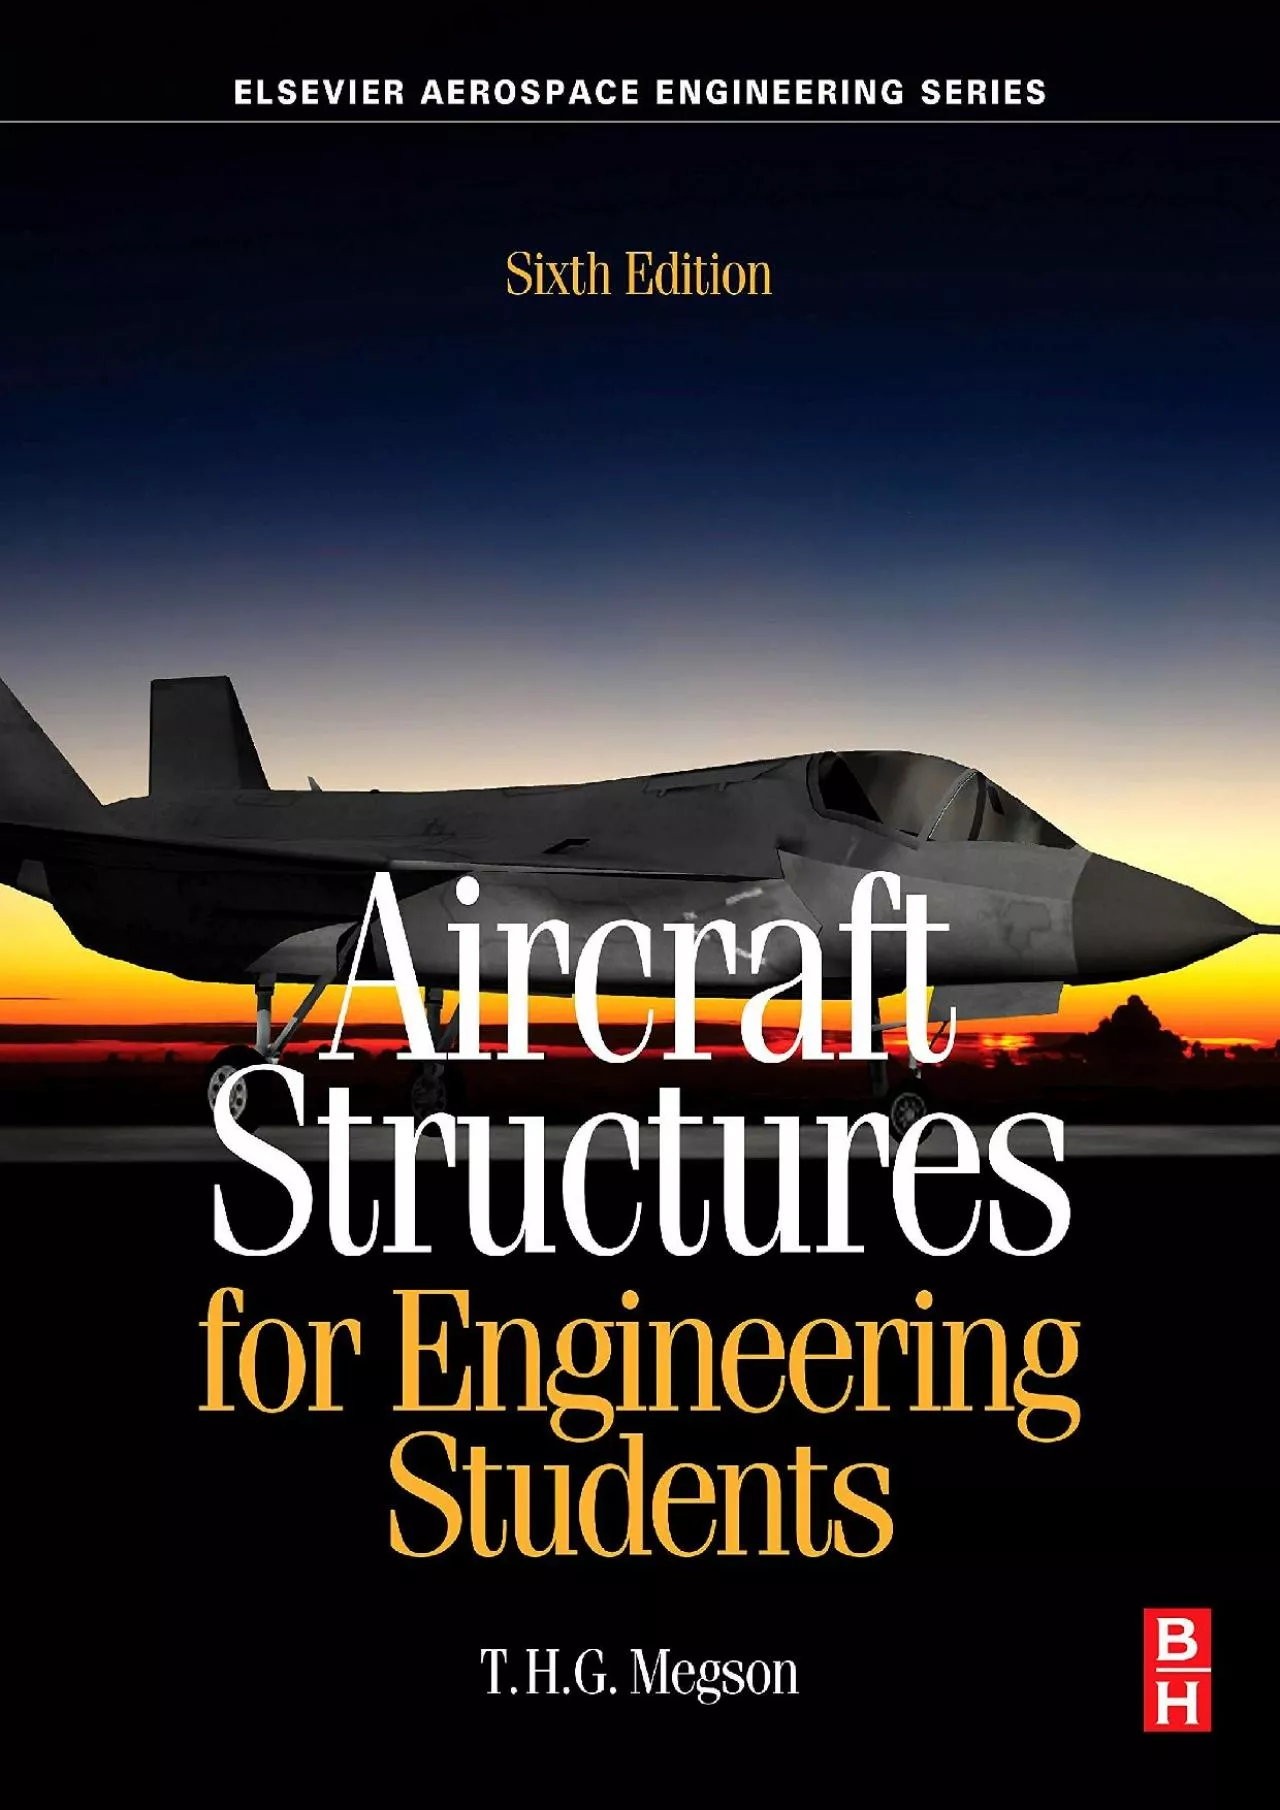 (EBOOK)-Aircraft Structures for Engineering Students (Aerospace Engineering)